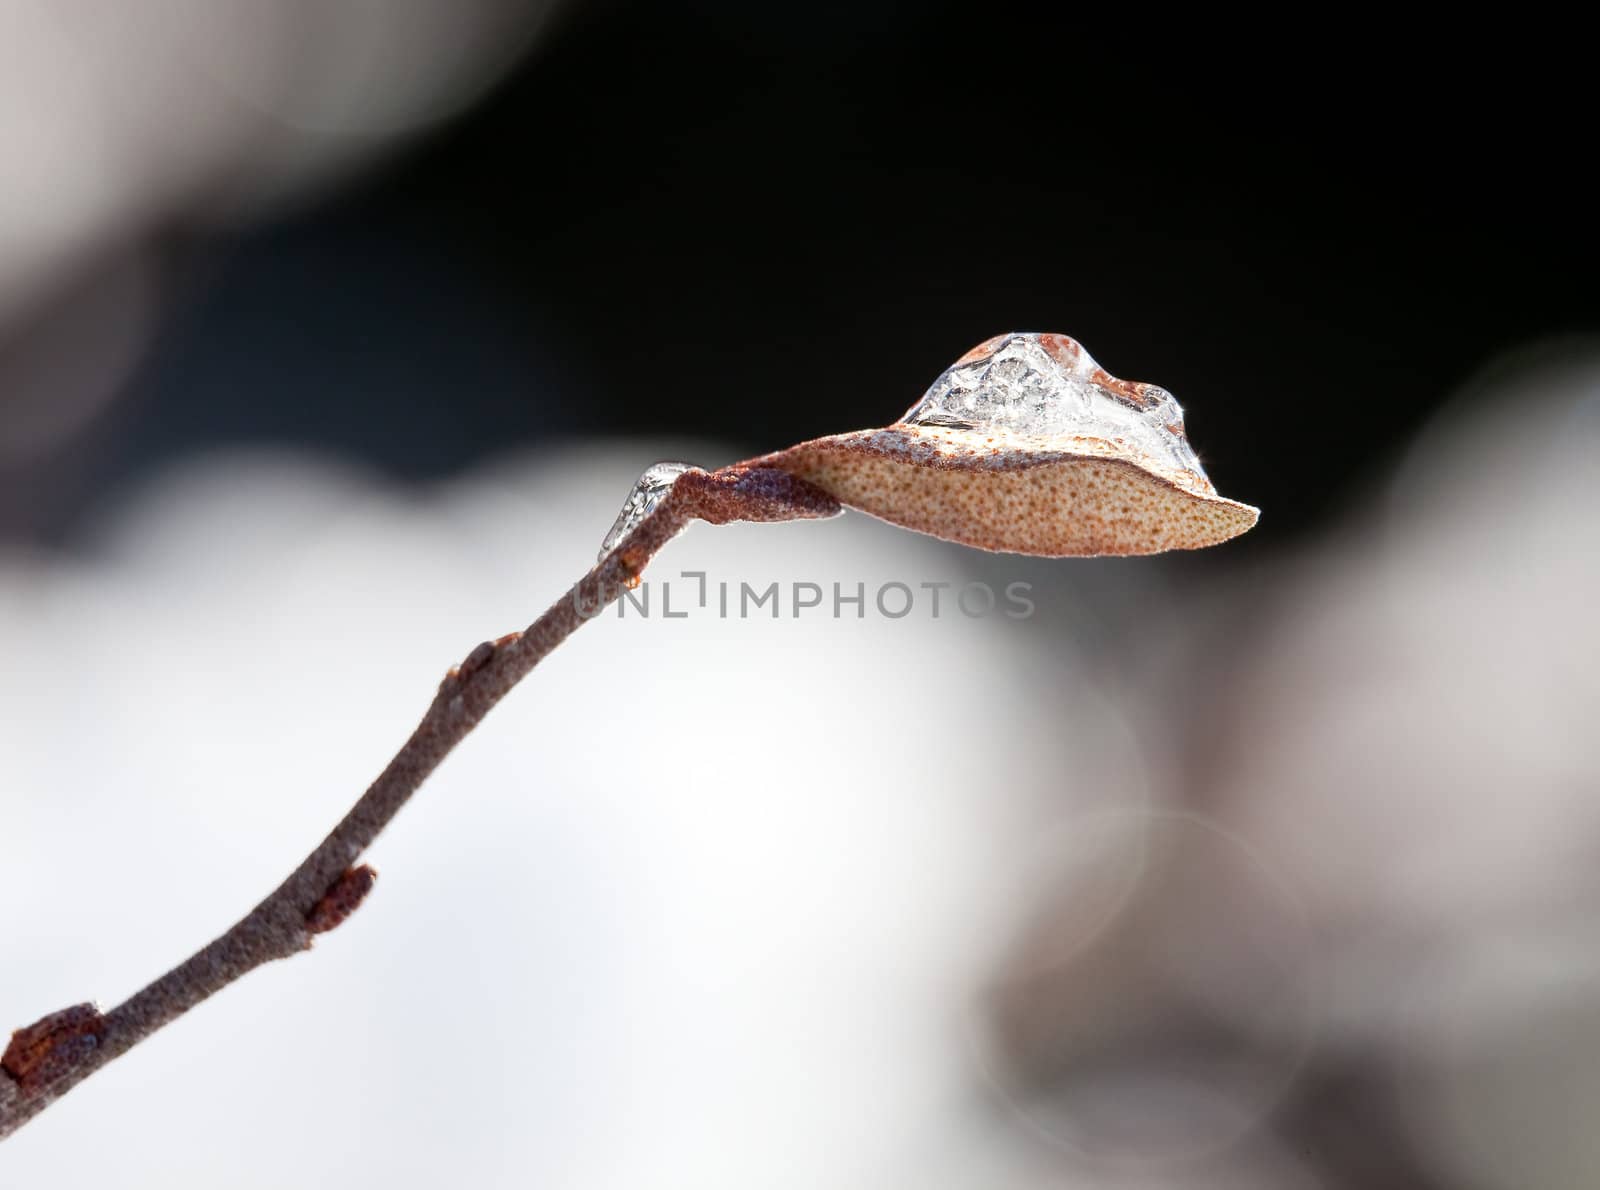 Frozen water in the grip of a very small leaflet on the end of a twig in winter